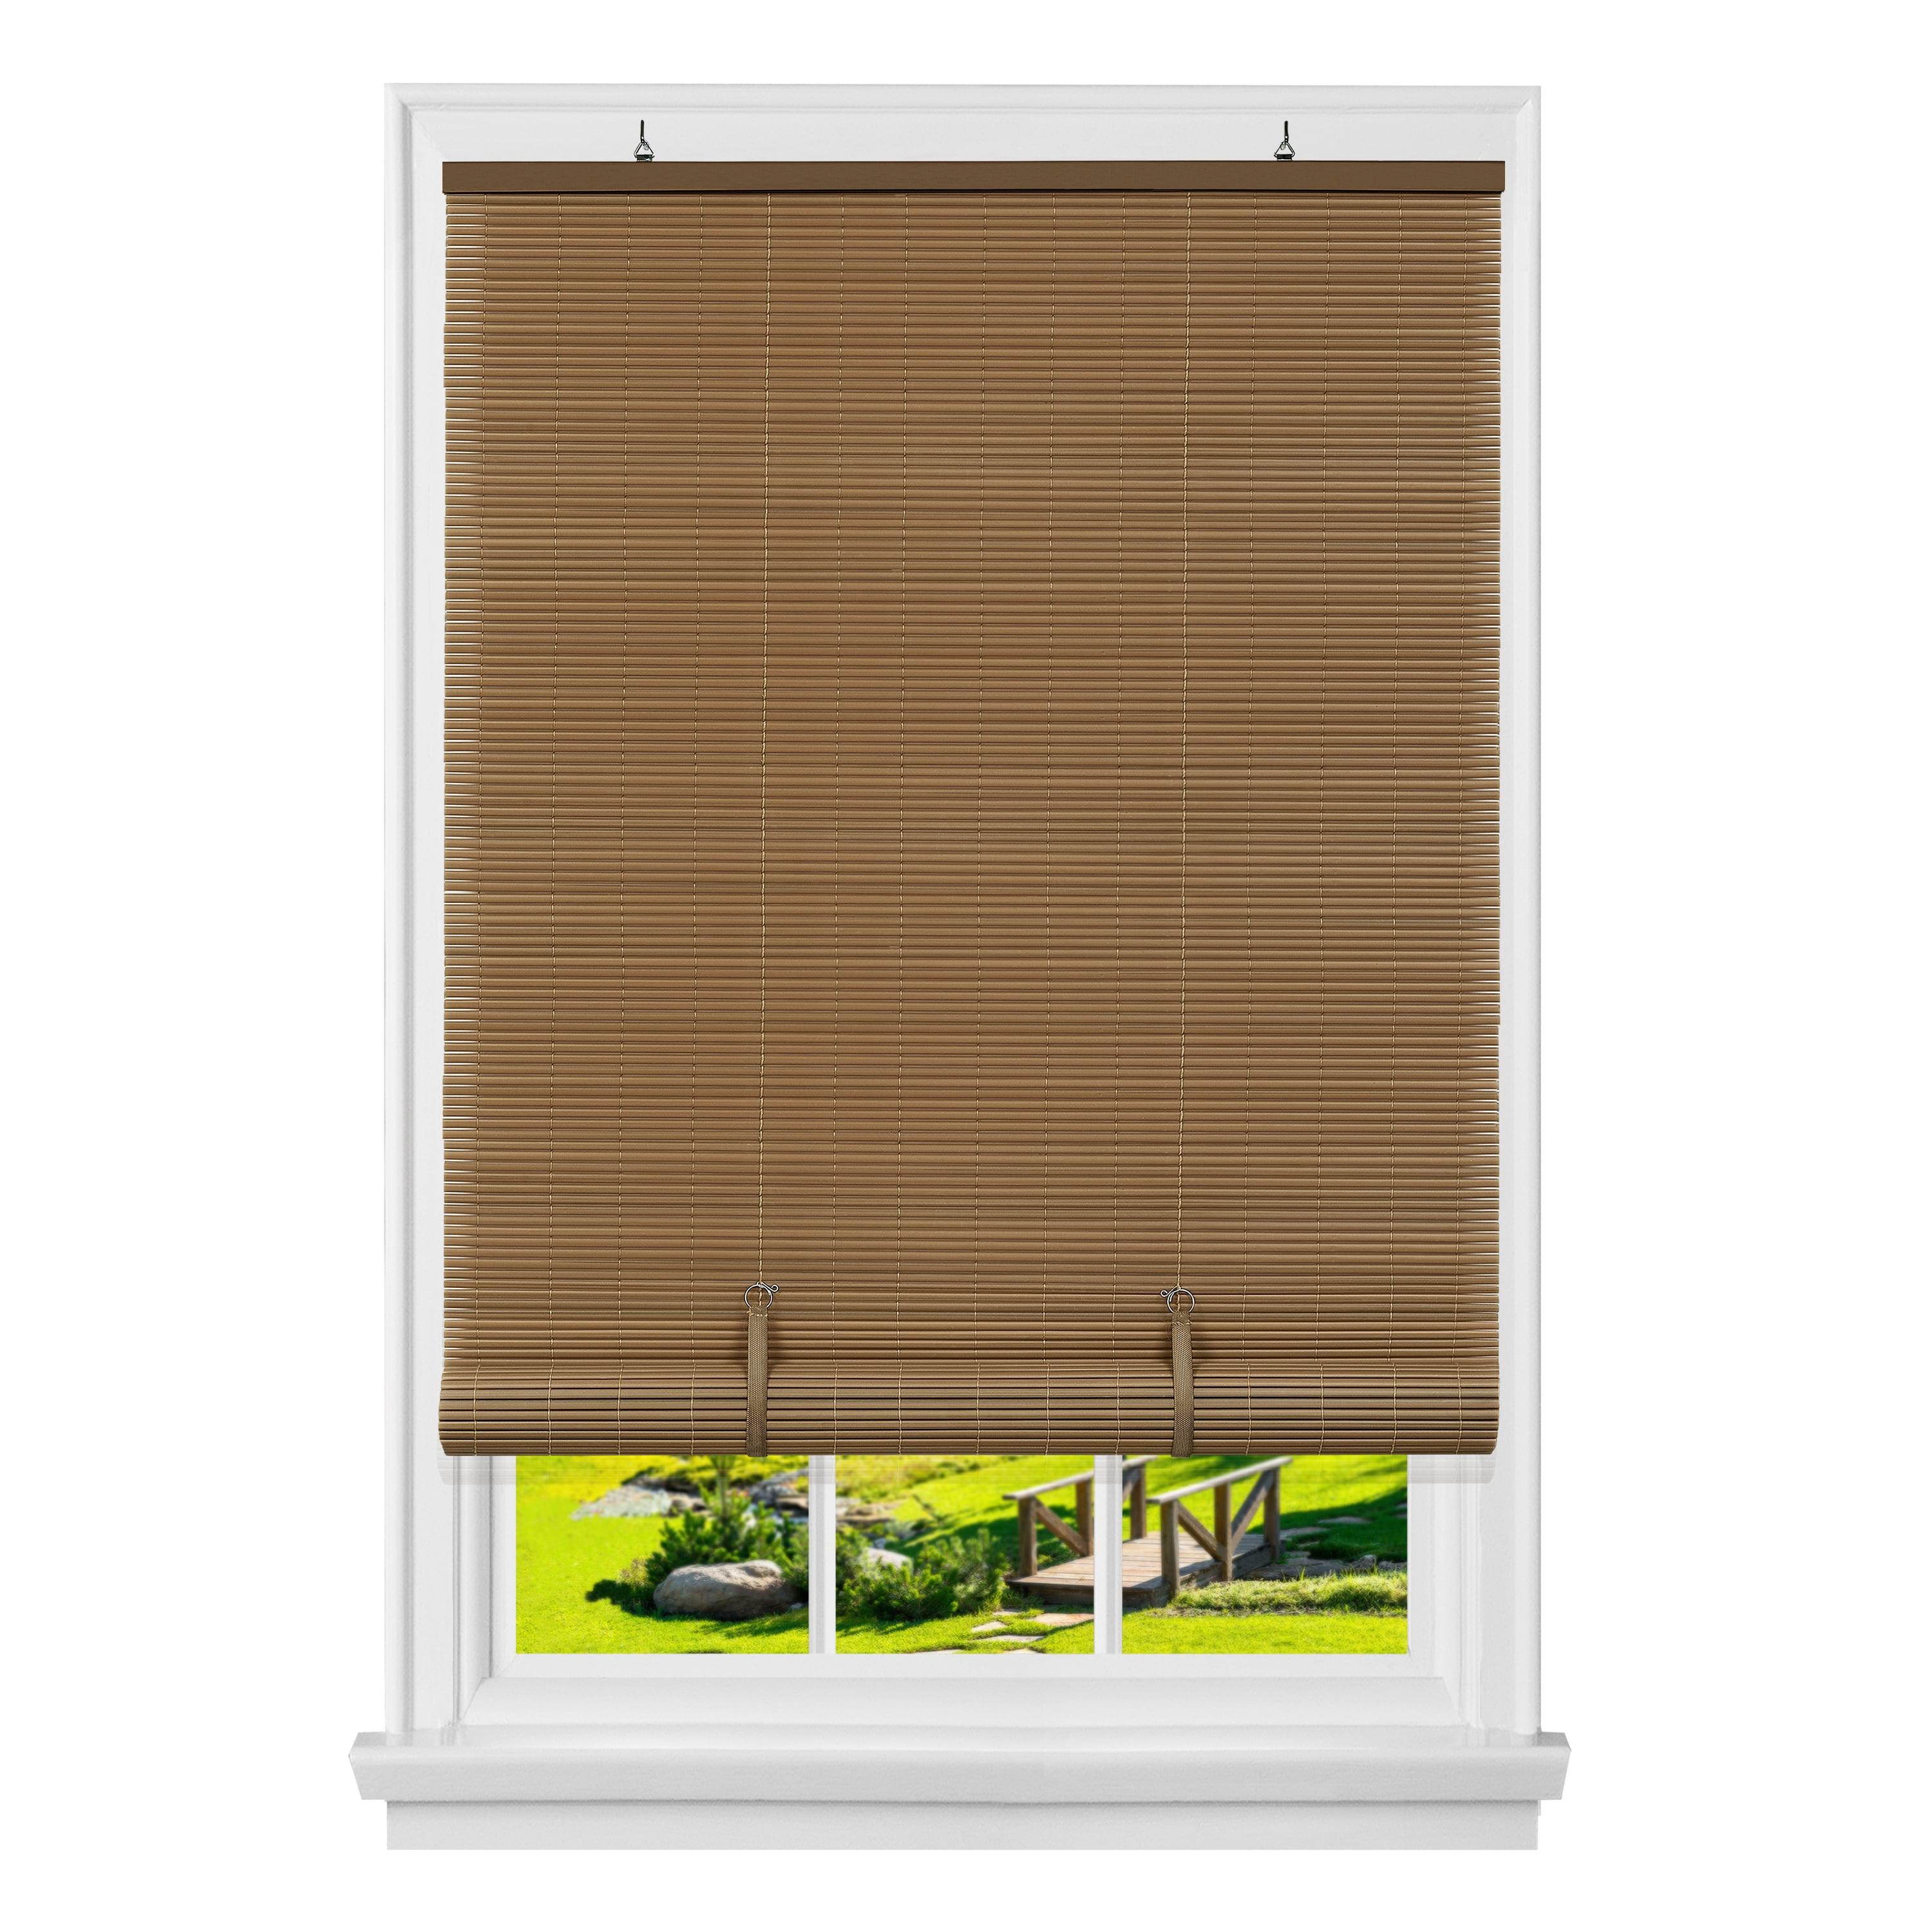 Cordless Solstice 48"x72" Vinyl Roll-Up Blind in Woodtone